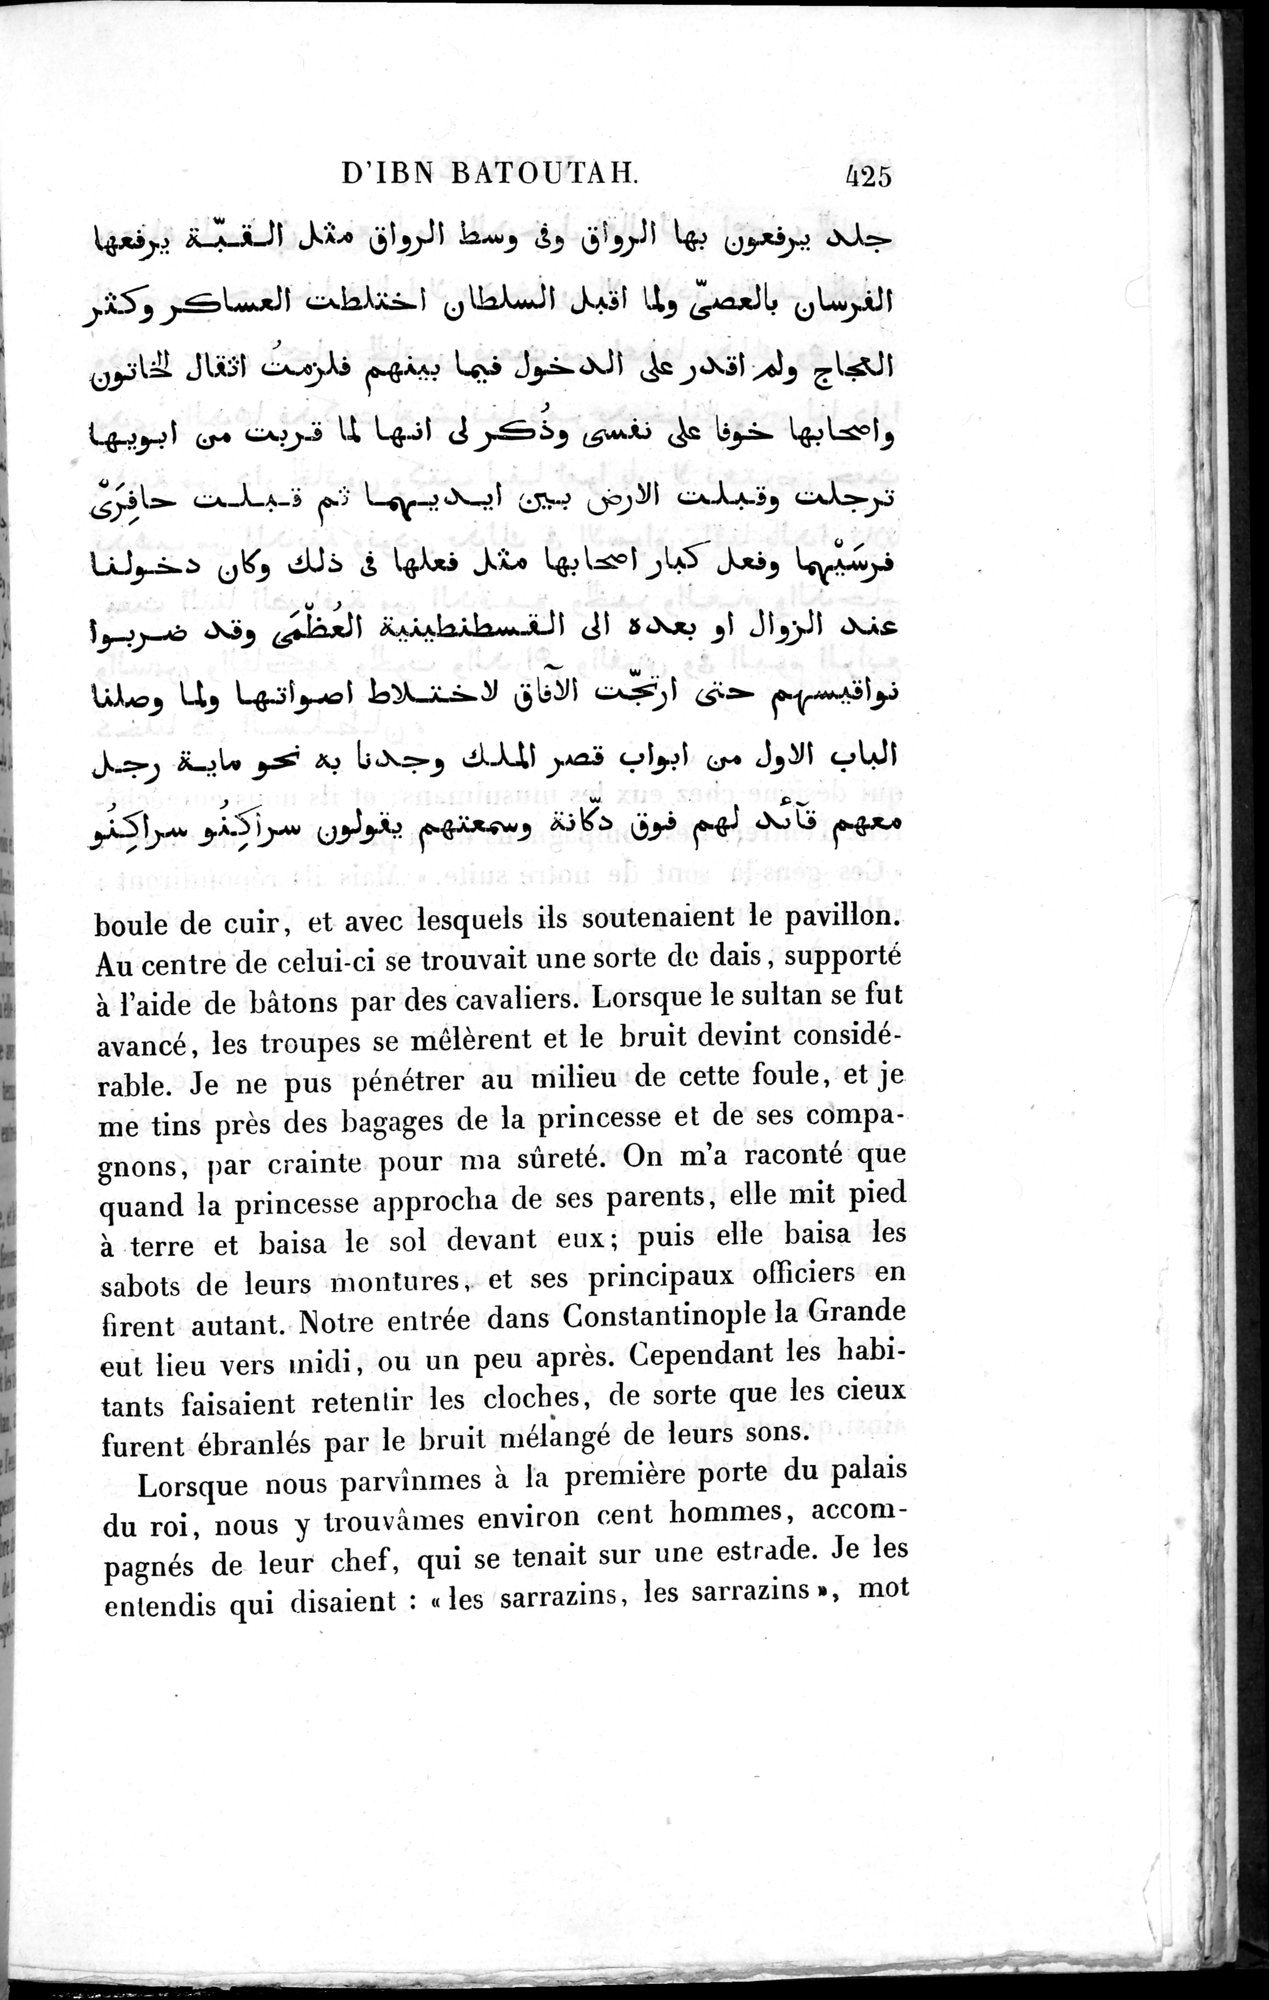 Voyages d'Ibn Batoutah : vol.2 / Page 453 (Grayscale High Resolution Image)